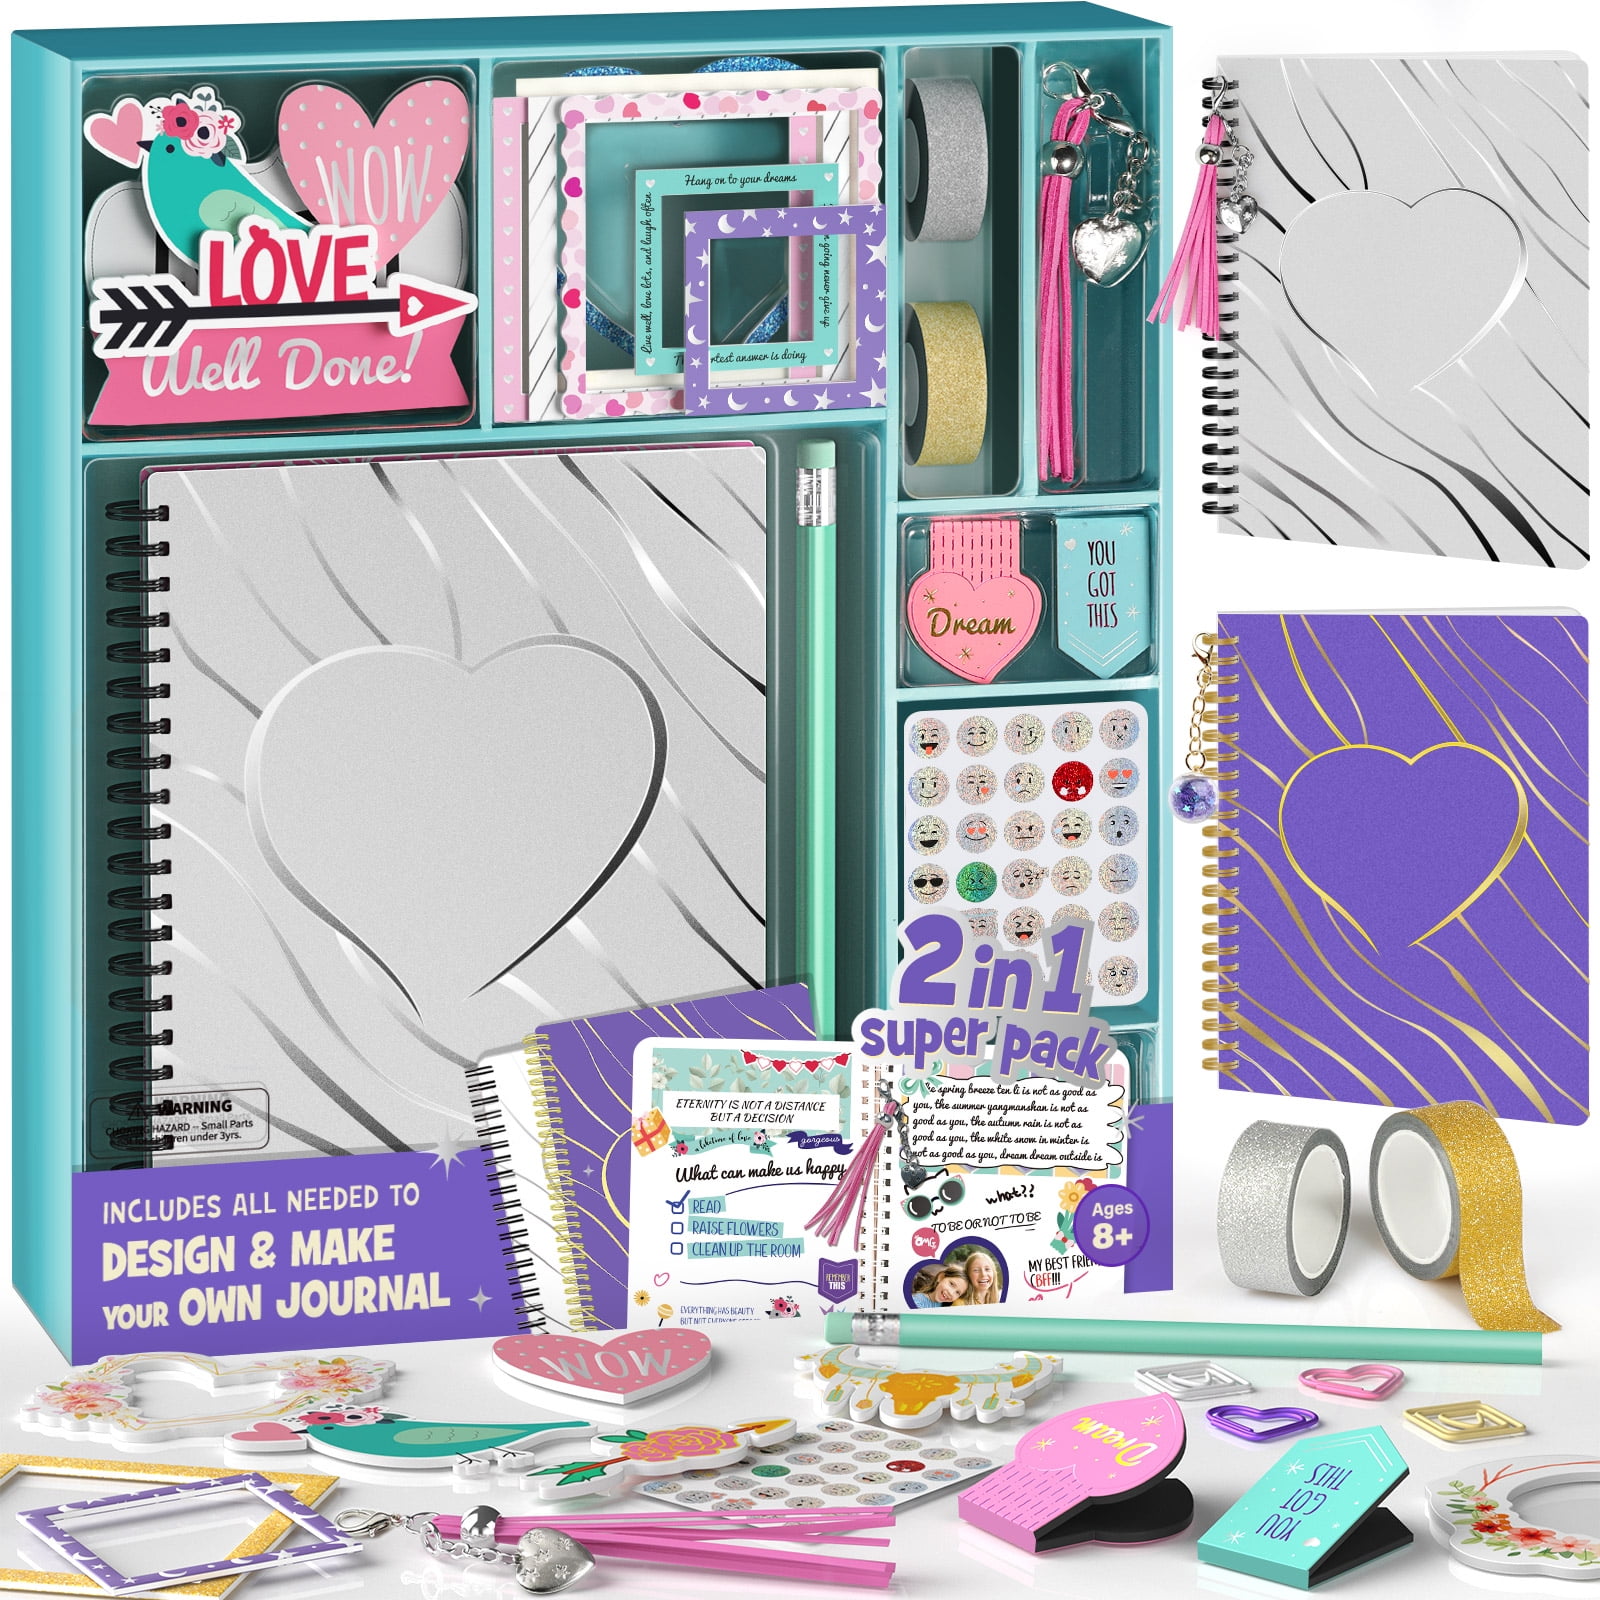 2-Pack DIY Journal Kit - Gifts for Girls Age of 8 9 10 11 12 13 Years Old -  Art & Crafts for Tween Kids - Girls Gifts Birthday Ideas - Teen Girls